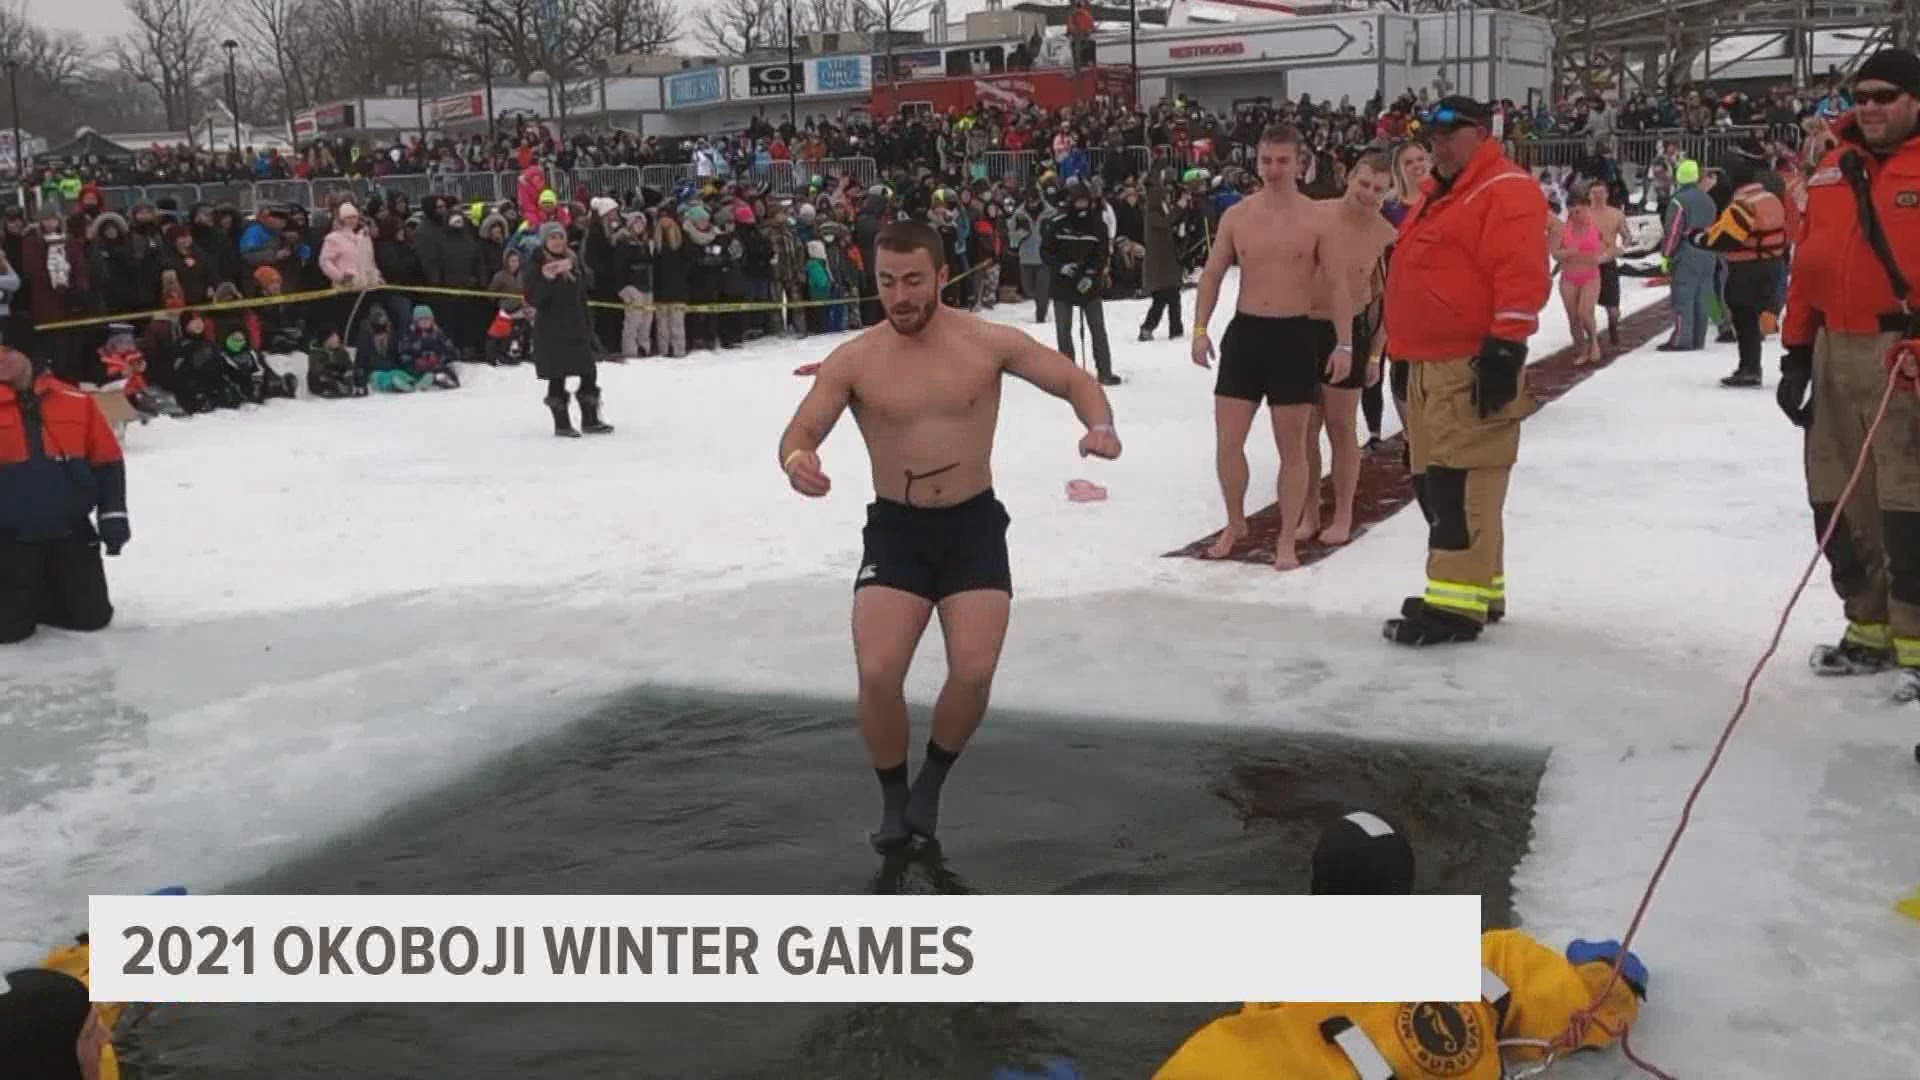 Sights and sounds from the 41st U of O Winter Games at Lake Okoboji